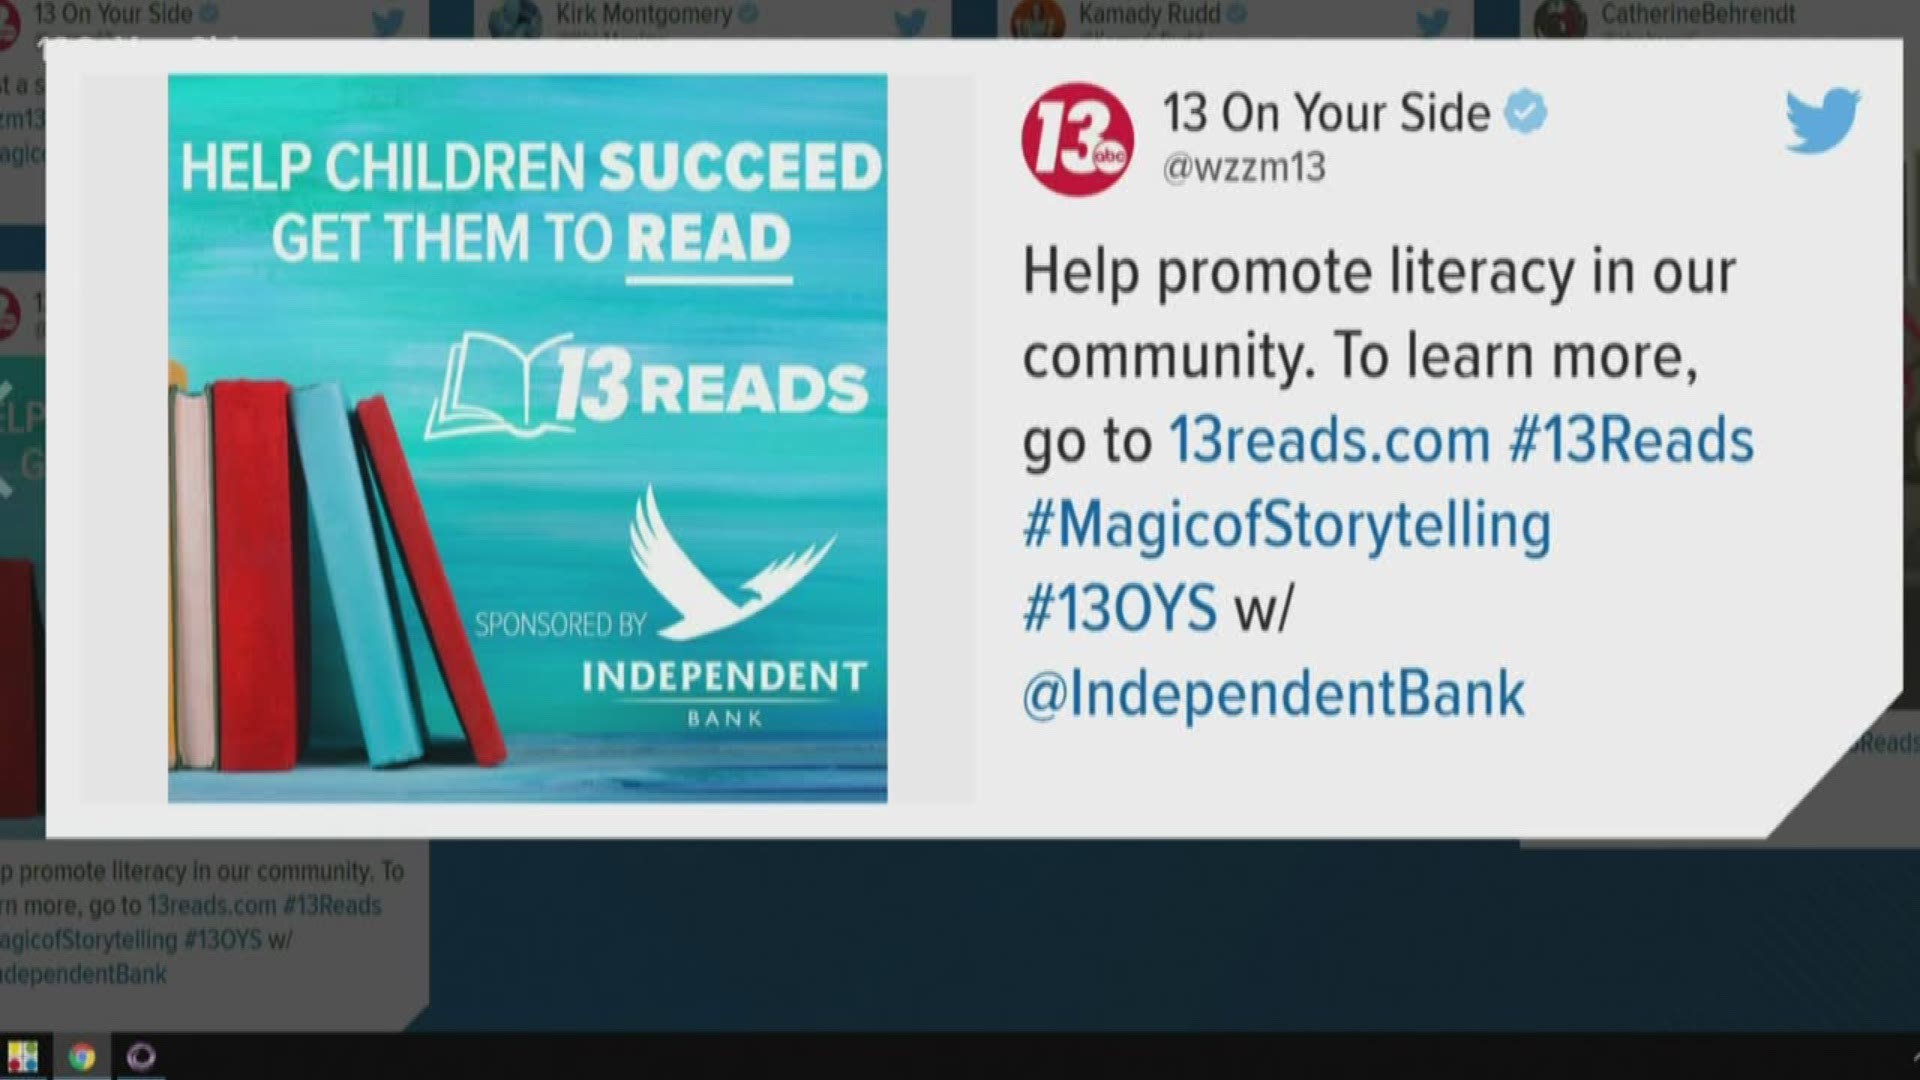 13 Reads is a literacy initiative aimed to increase family literacy and ensure students are reading at the proper level.